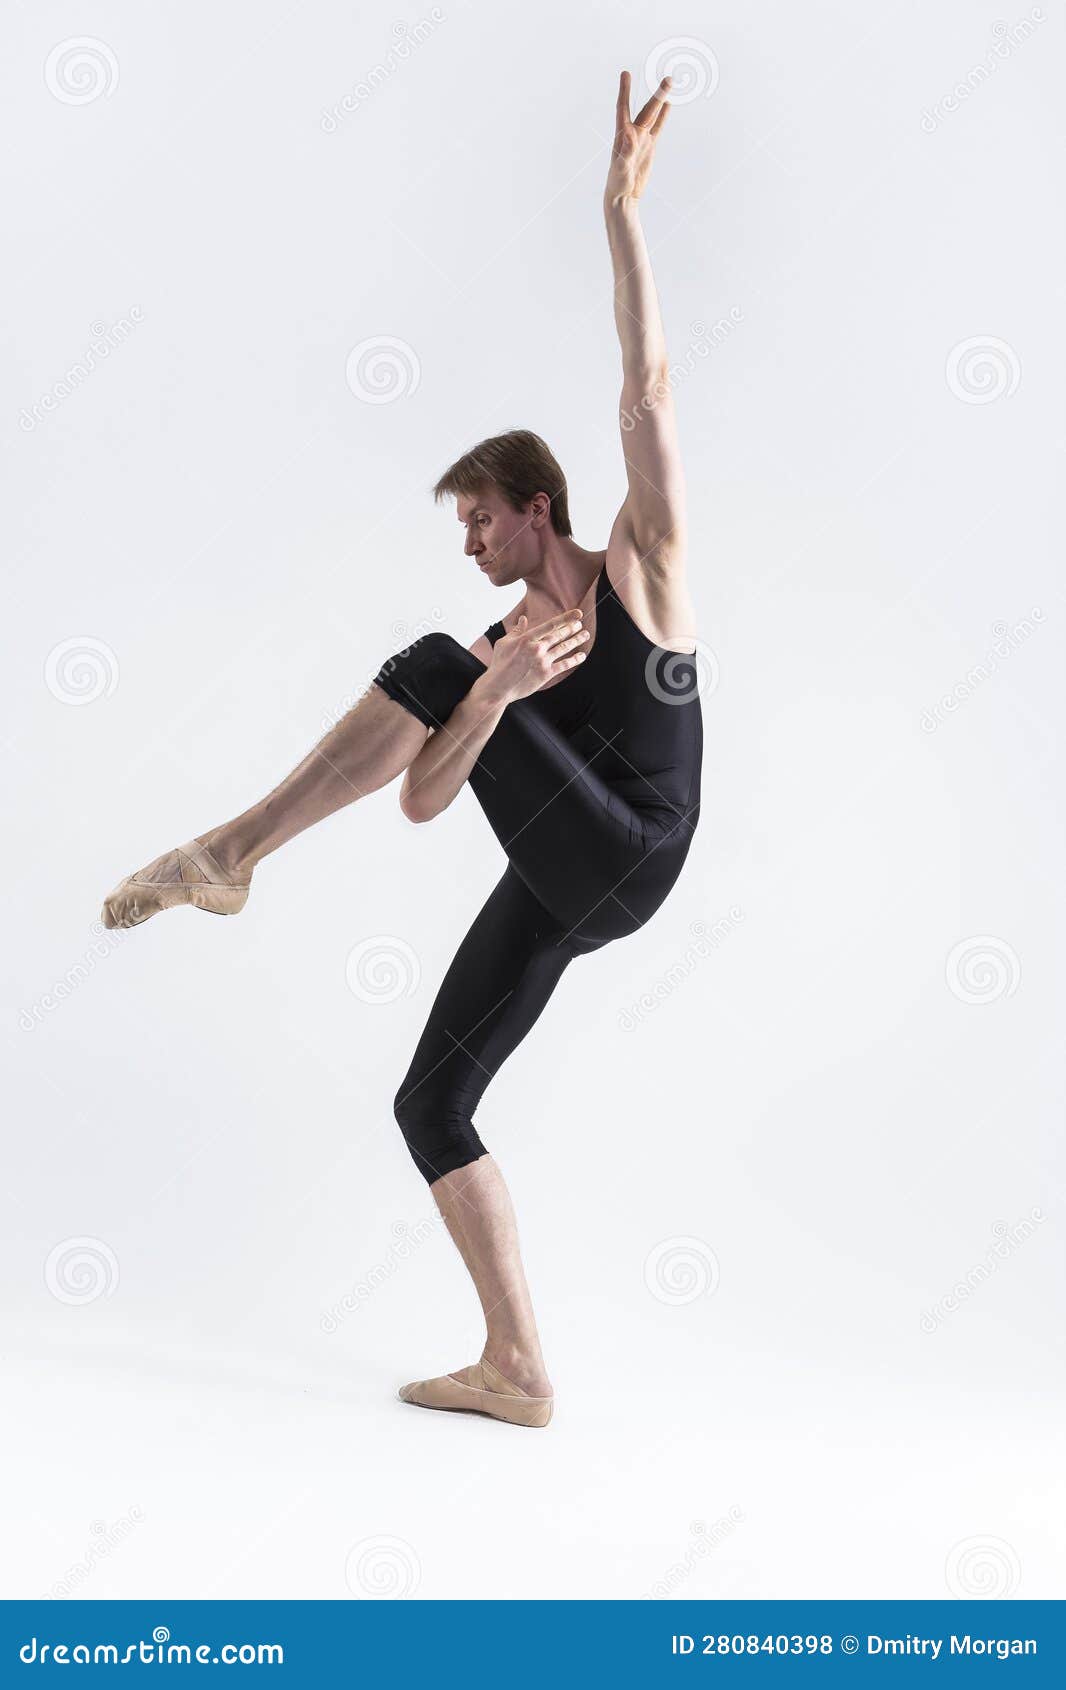 Male Ballet Dancer With A Pose · Free Stock Photo